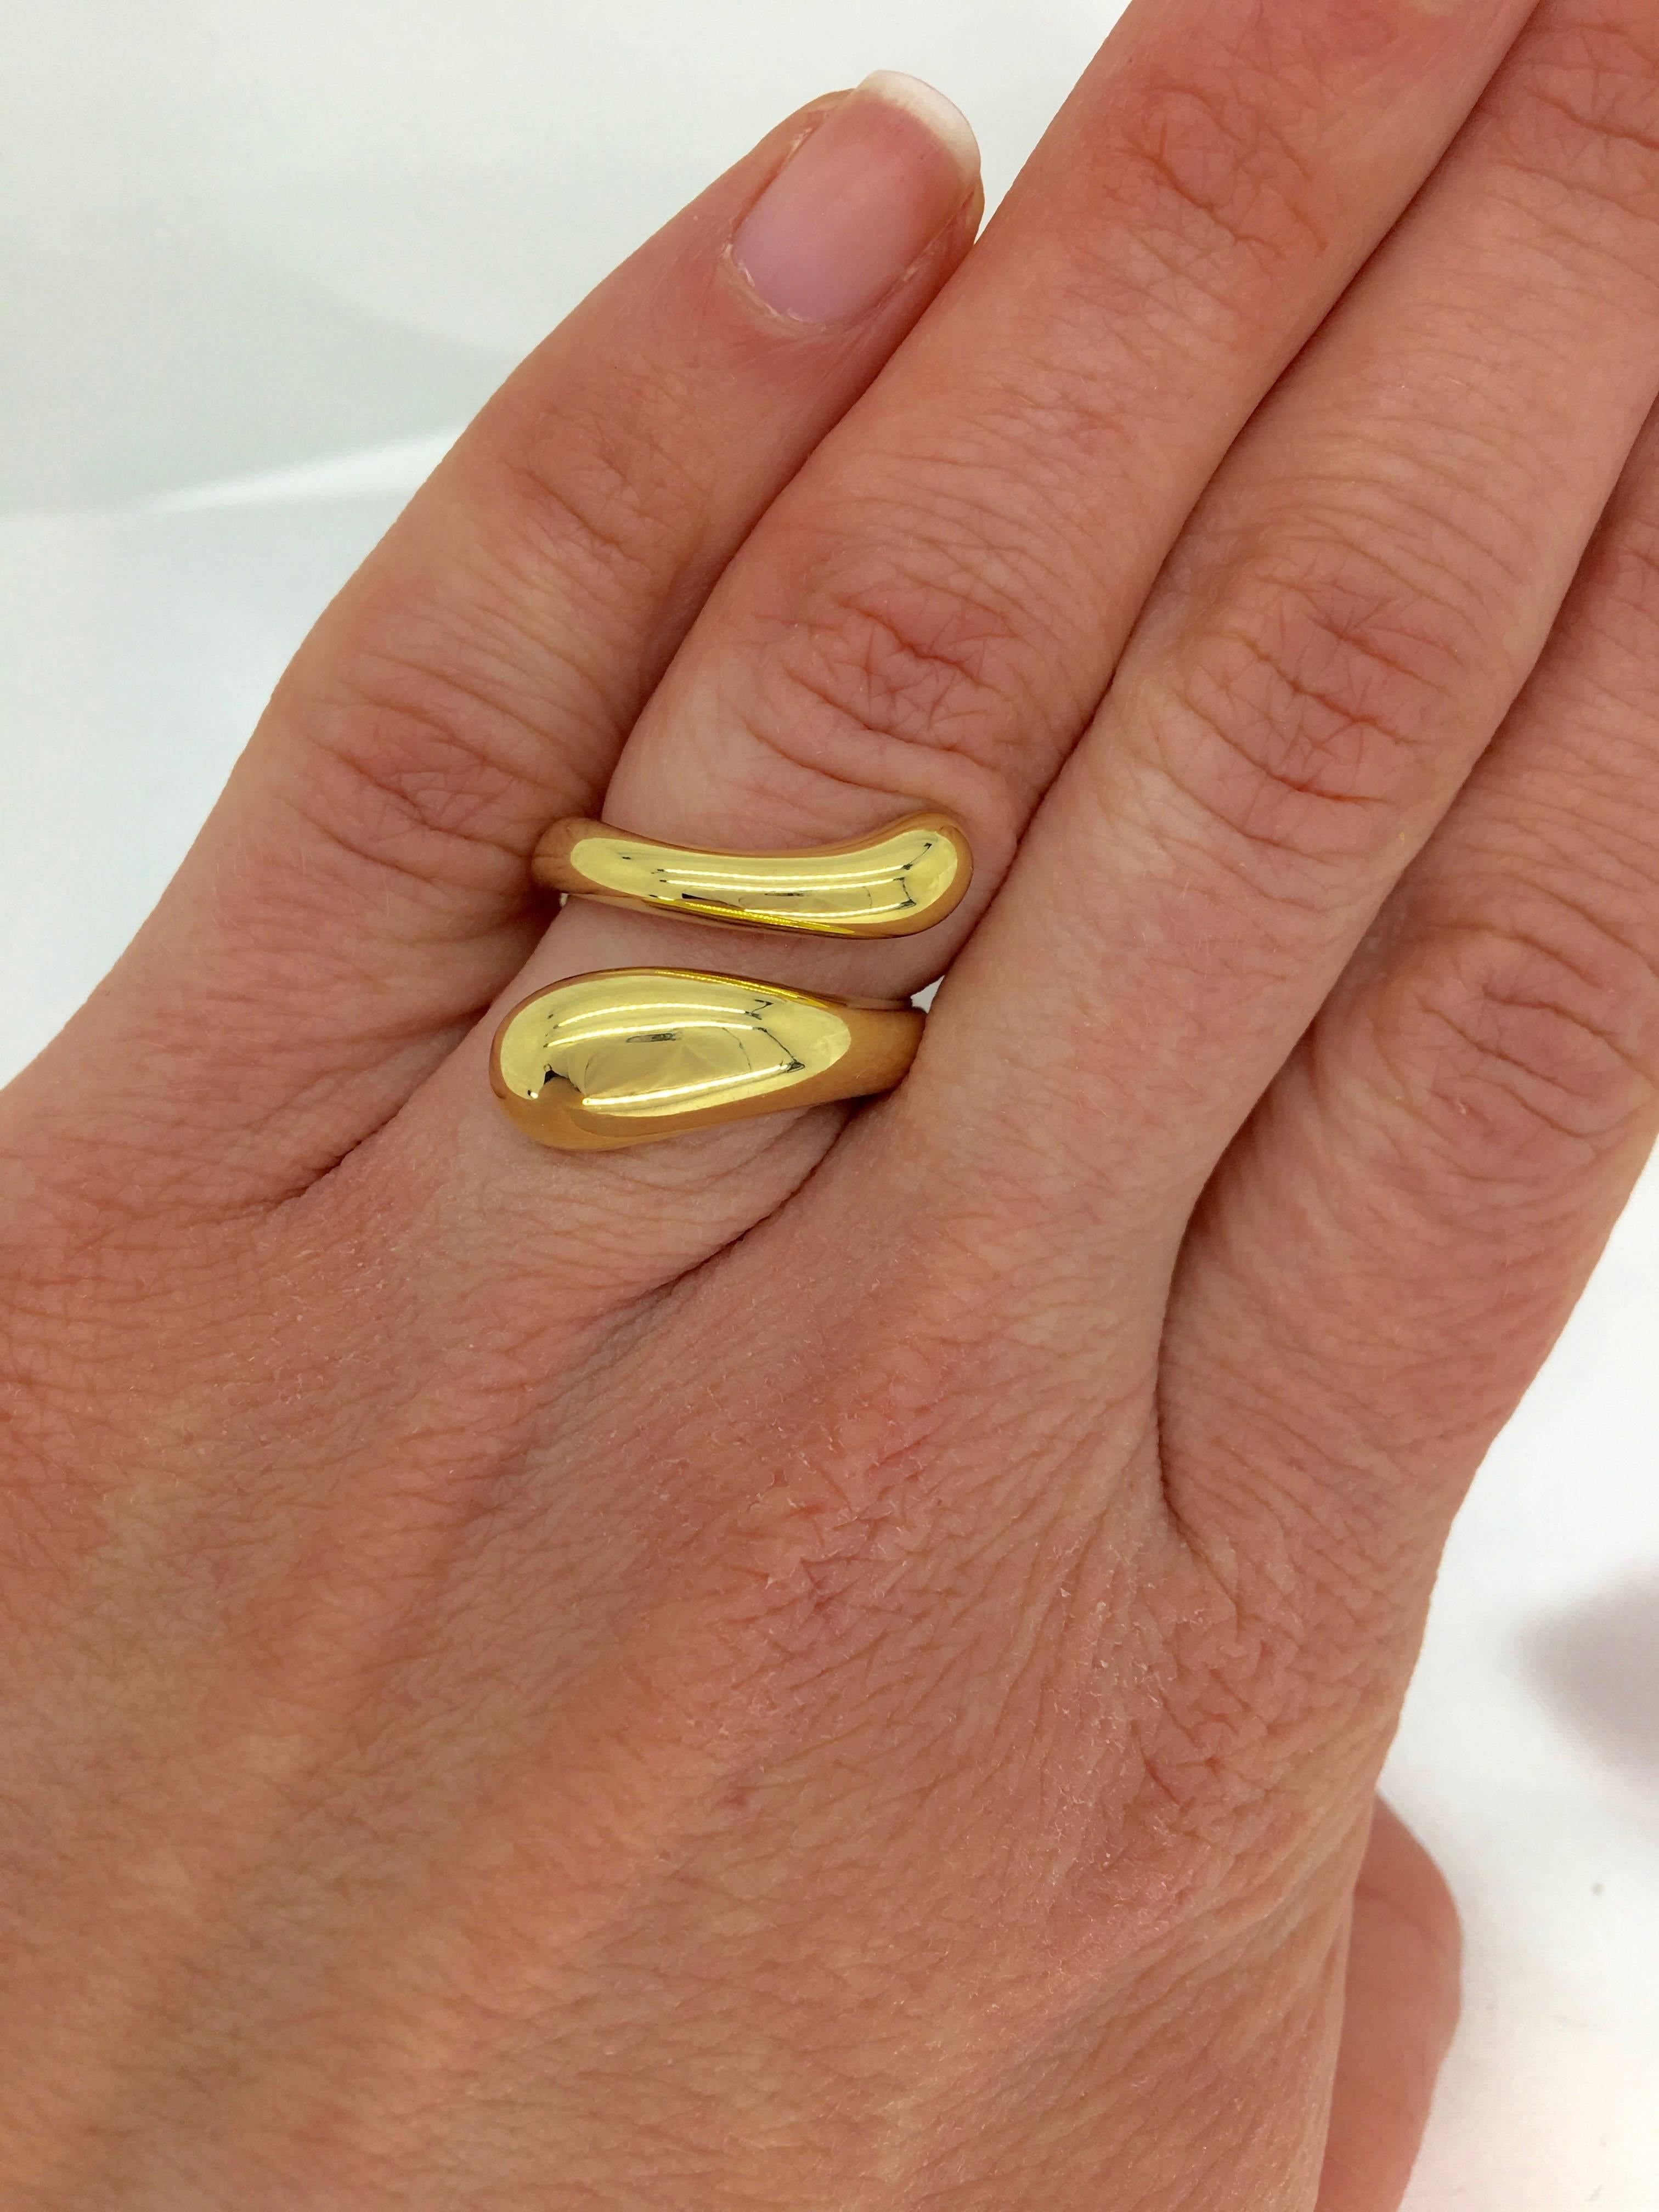 This elegant bypass style Tiffany & Co. ring is Elsa Peretti’s “Teardrop Ring”. The 18K Yellow Gold ring is a size 4 and weighs 15.8 grams. The ring is stamped “Elsa Peretti TIFFANY & CO. 750 SPAIN”.